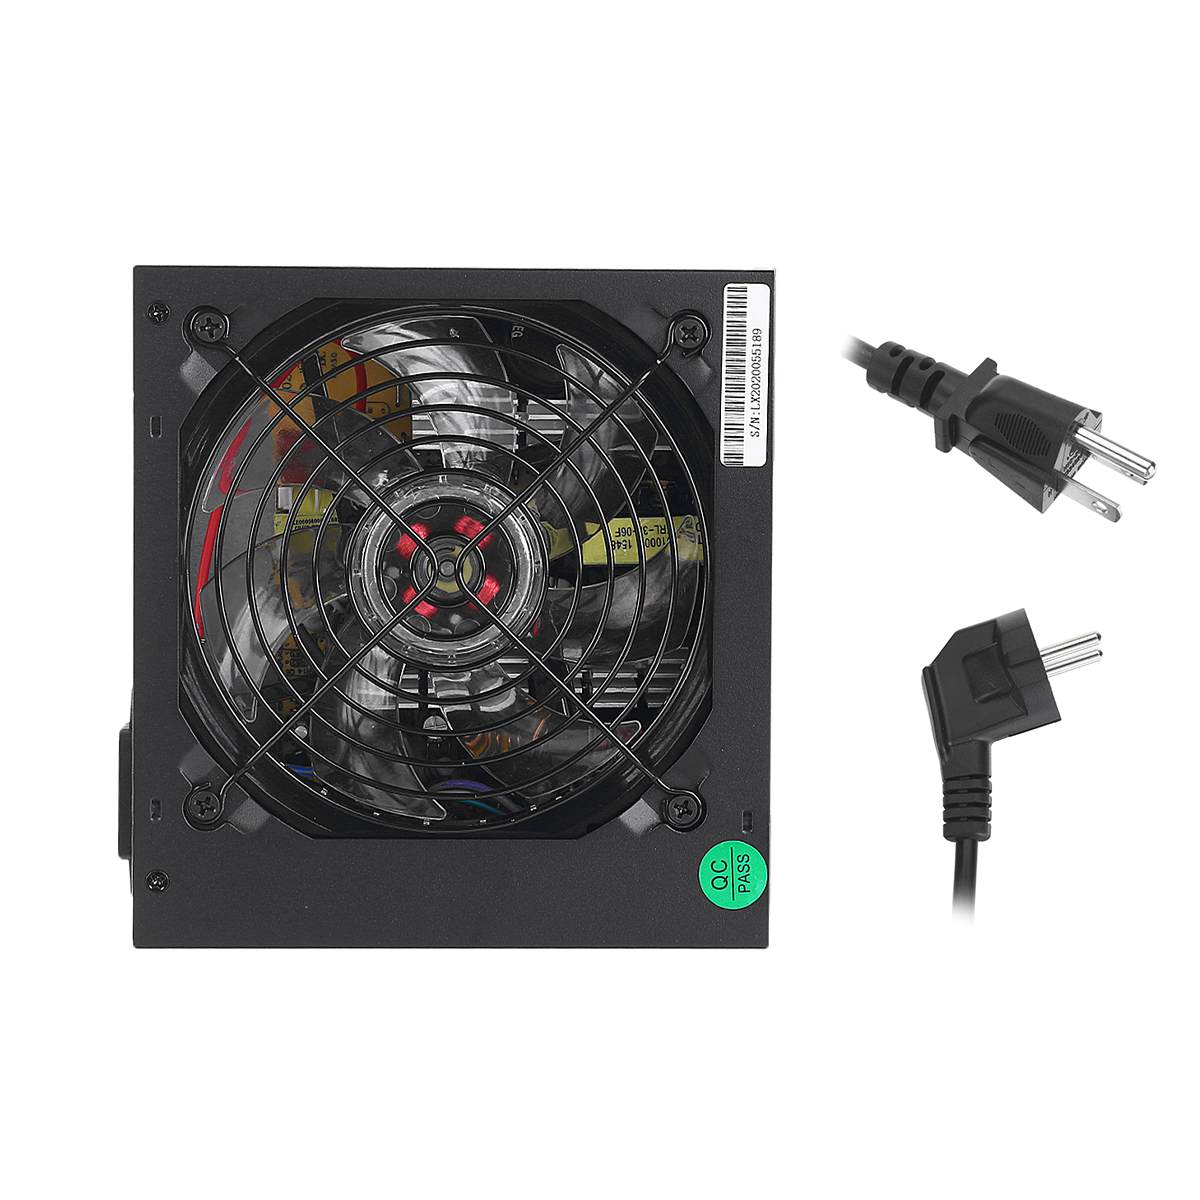 750W Power Supply PSU PFC Red Led Silent Fan ATX 24pin 12V PC Computer SATA Gaming PC Power Supply For Intel AMD Computer